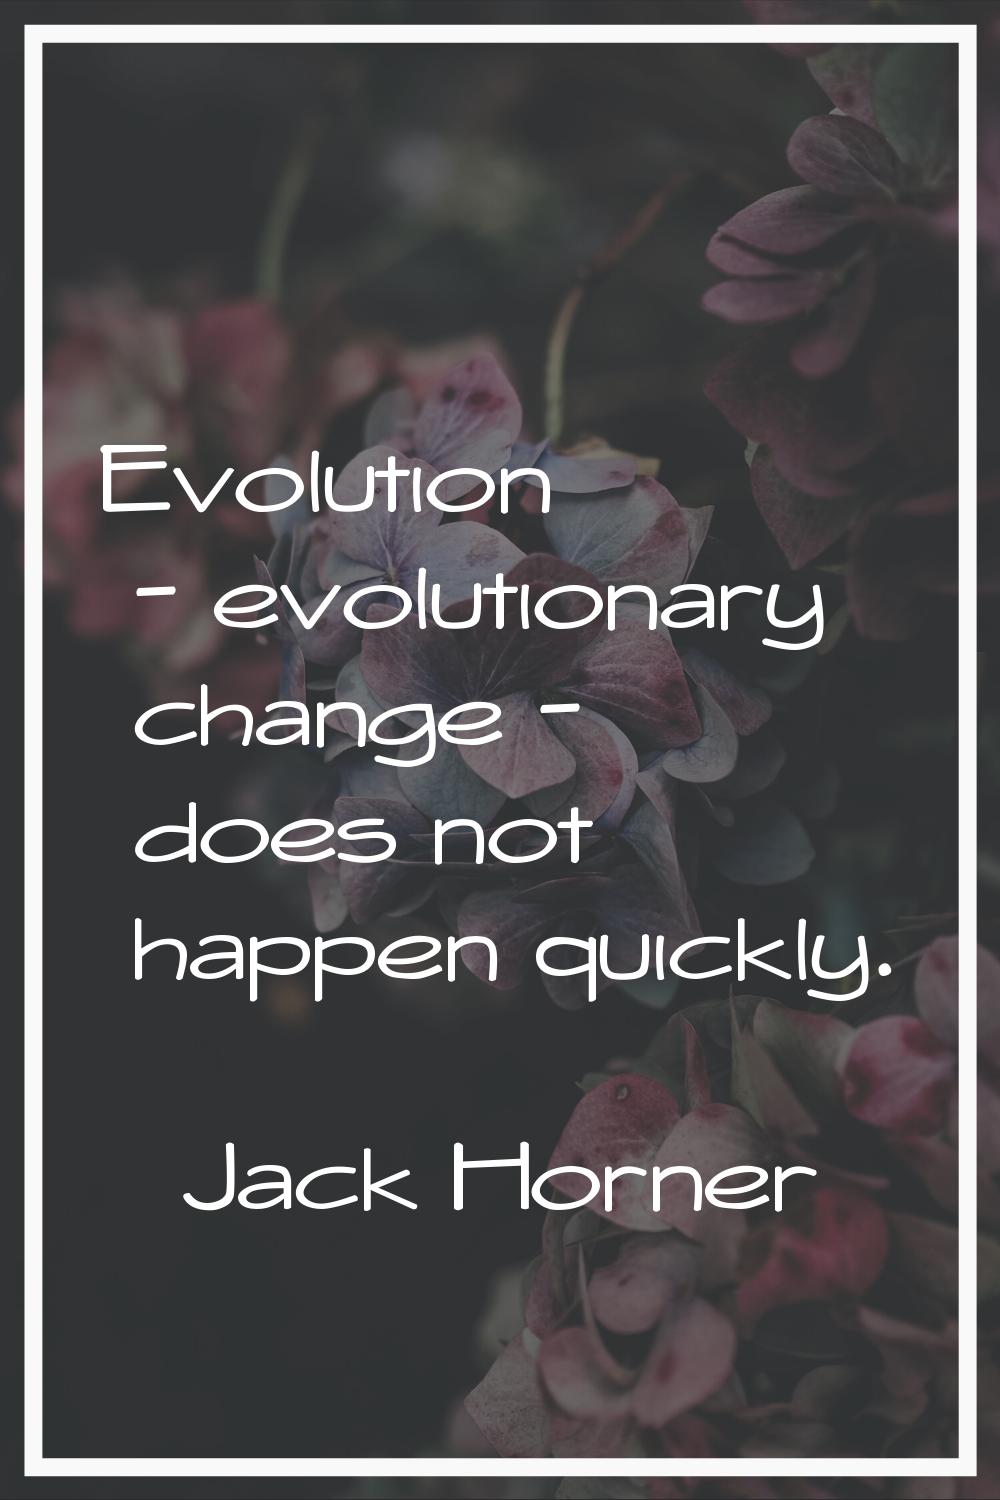 Evolution - evolutionary change - does not happen quickly.